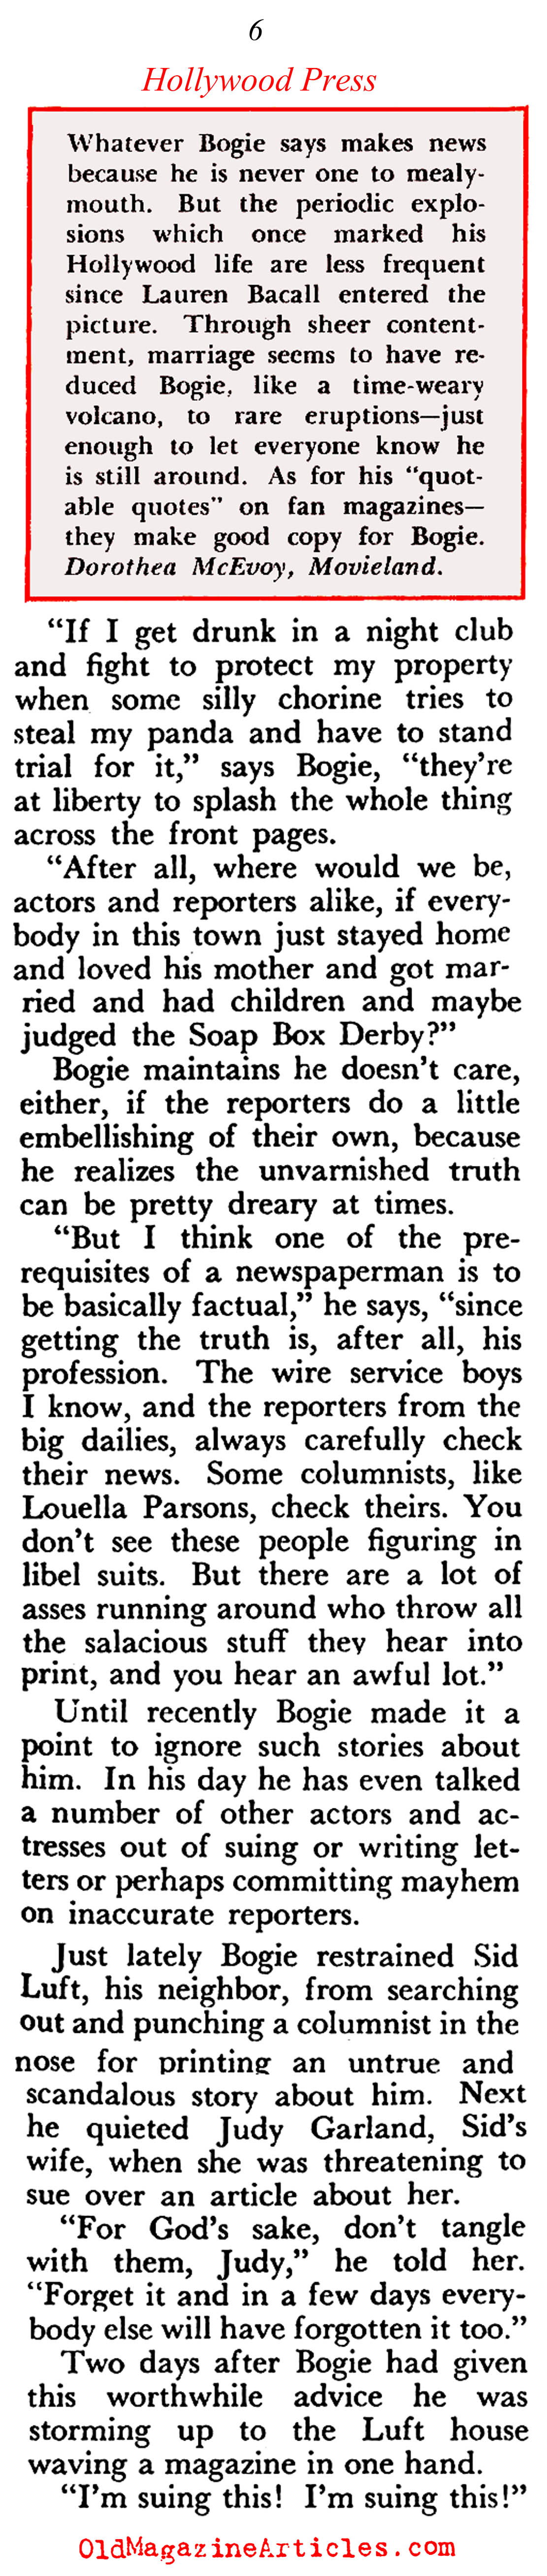 Humphrey Bogart and his Feud with the Hollywood Press (Pageant Magazine, 1956)